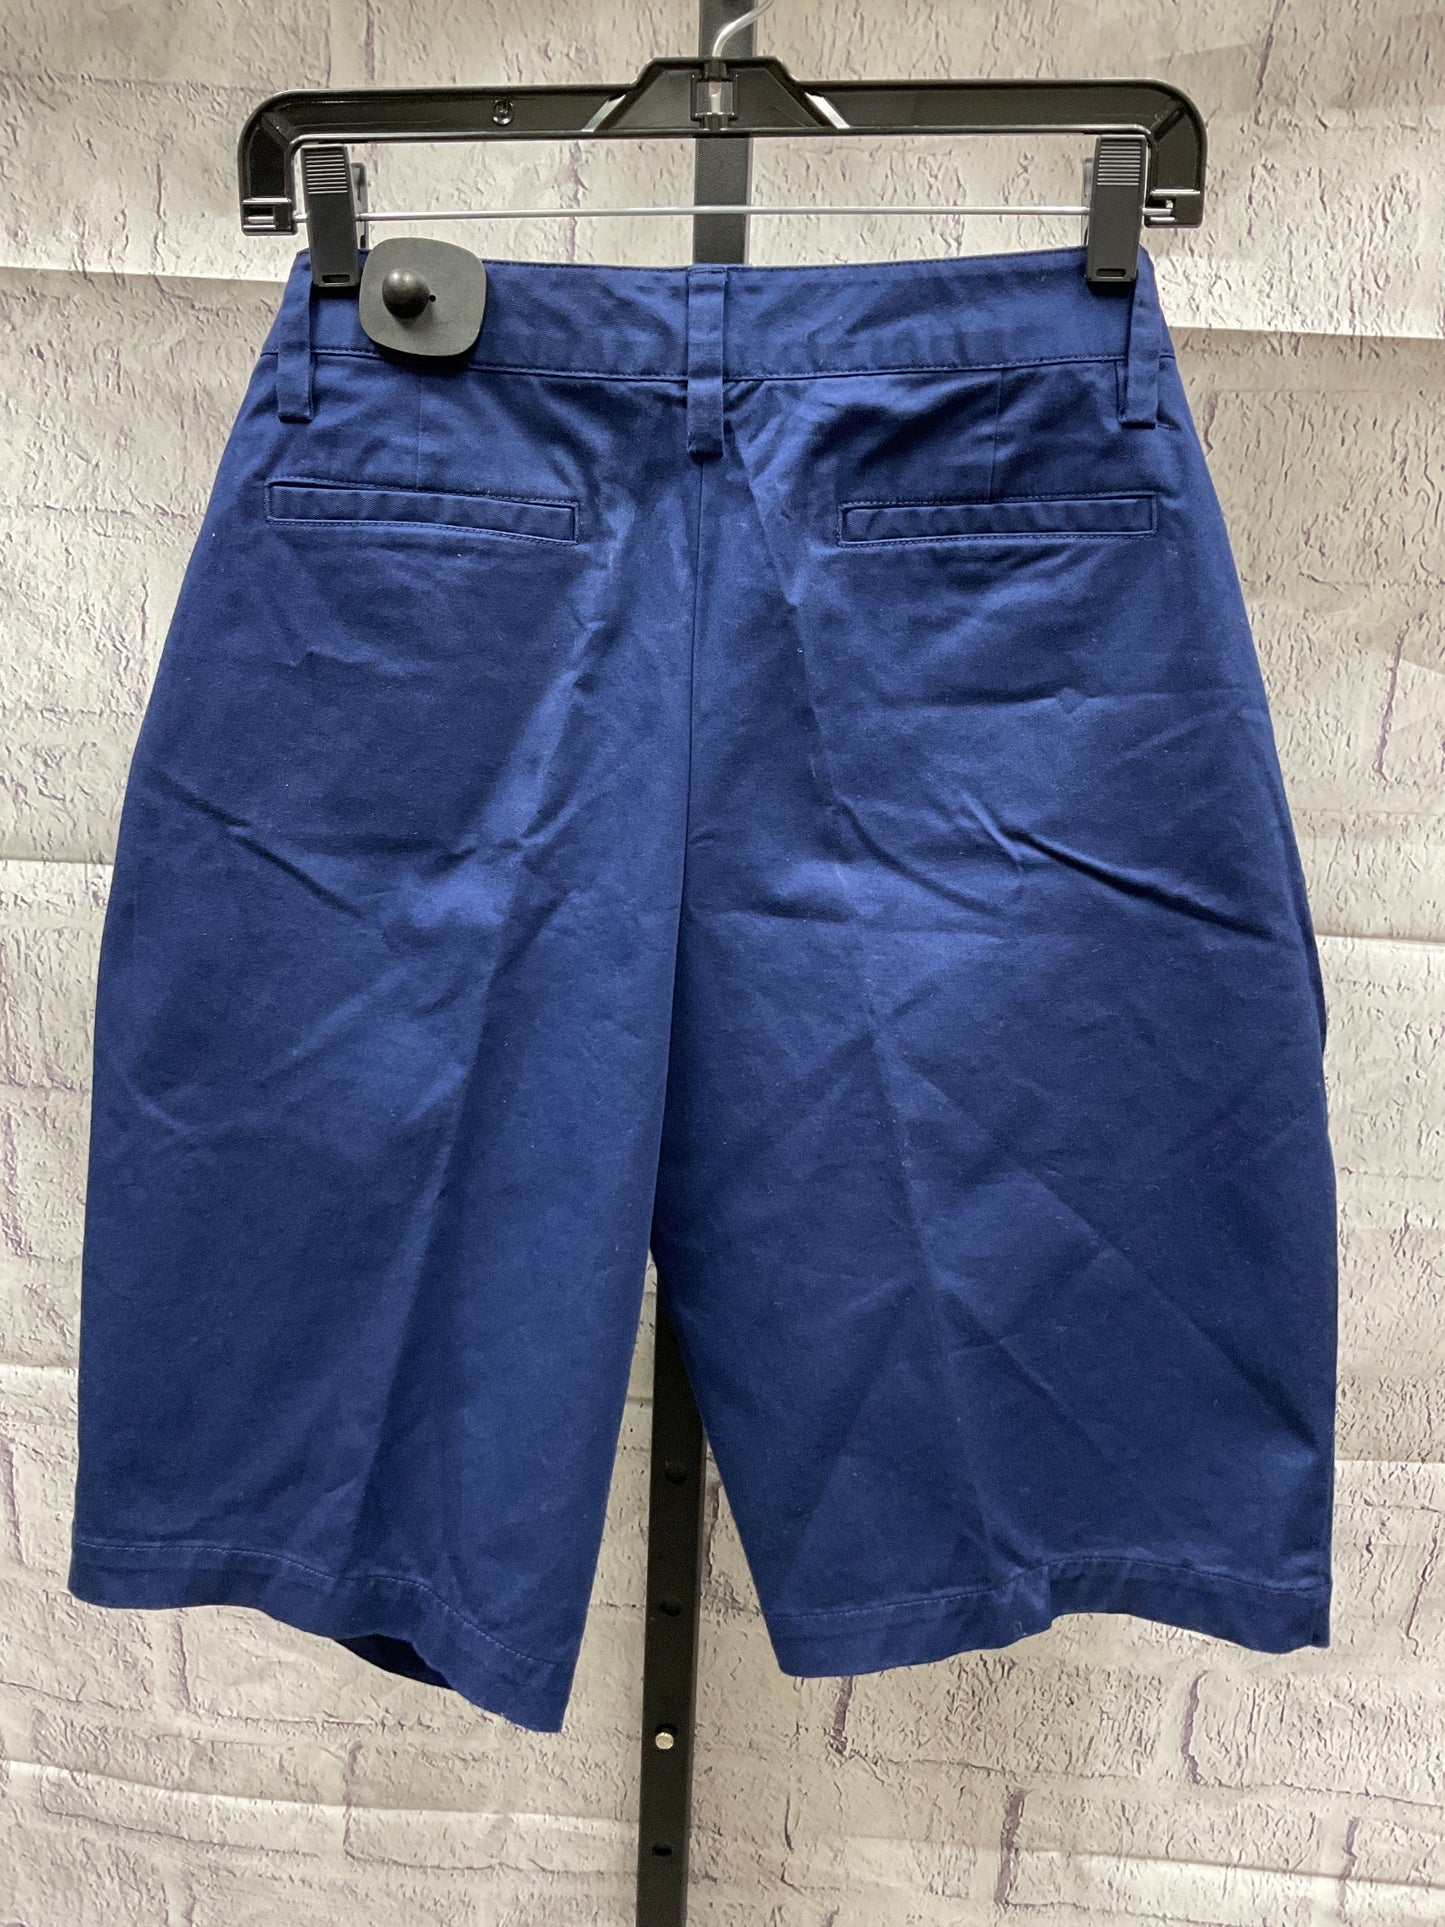 Shorts By Lands End  Size: 10